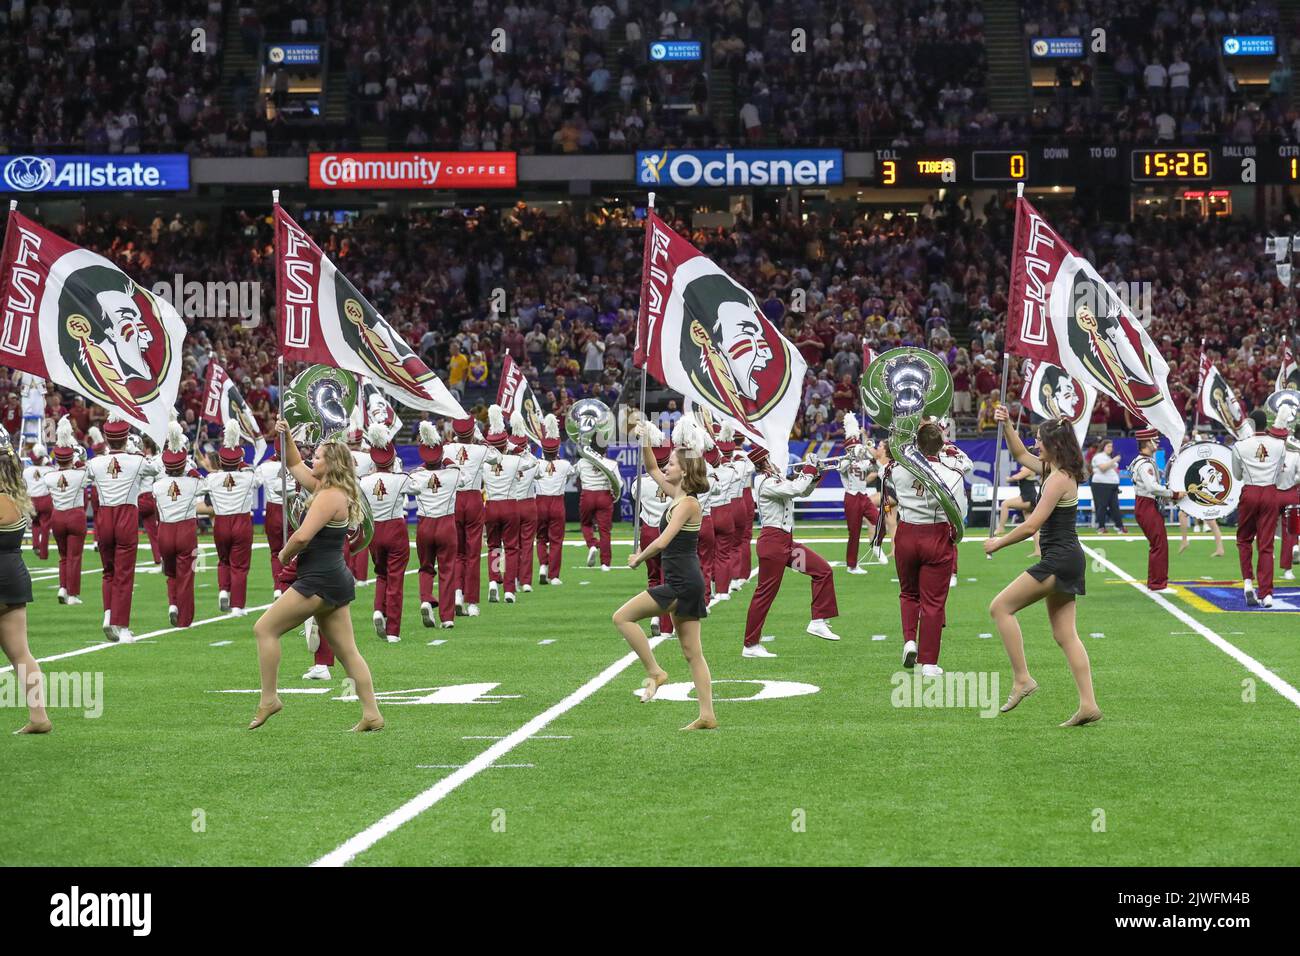 September 4, 2022: The Florida St. band performs prior to the Allstate Louisiana Kickoff Game between the Florida St. Seminoles and the LSU Tigers at the Caesars Superdome in New Orleans, LA. Jonathan Mailhes/CSM Stock Photo